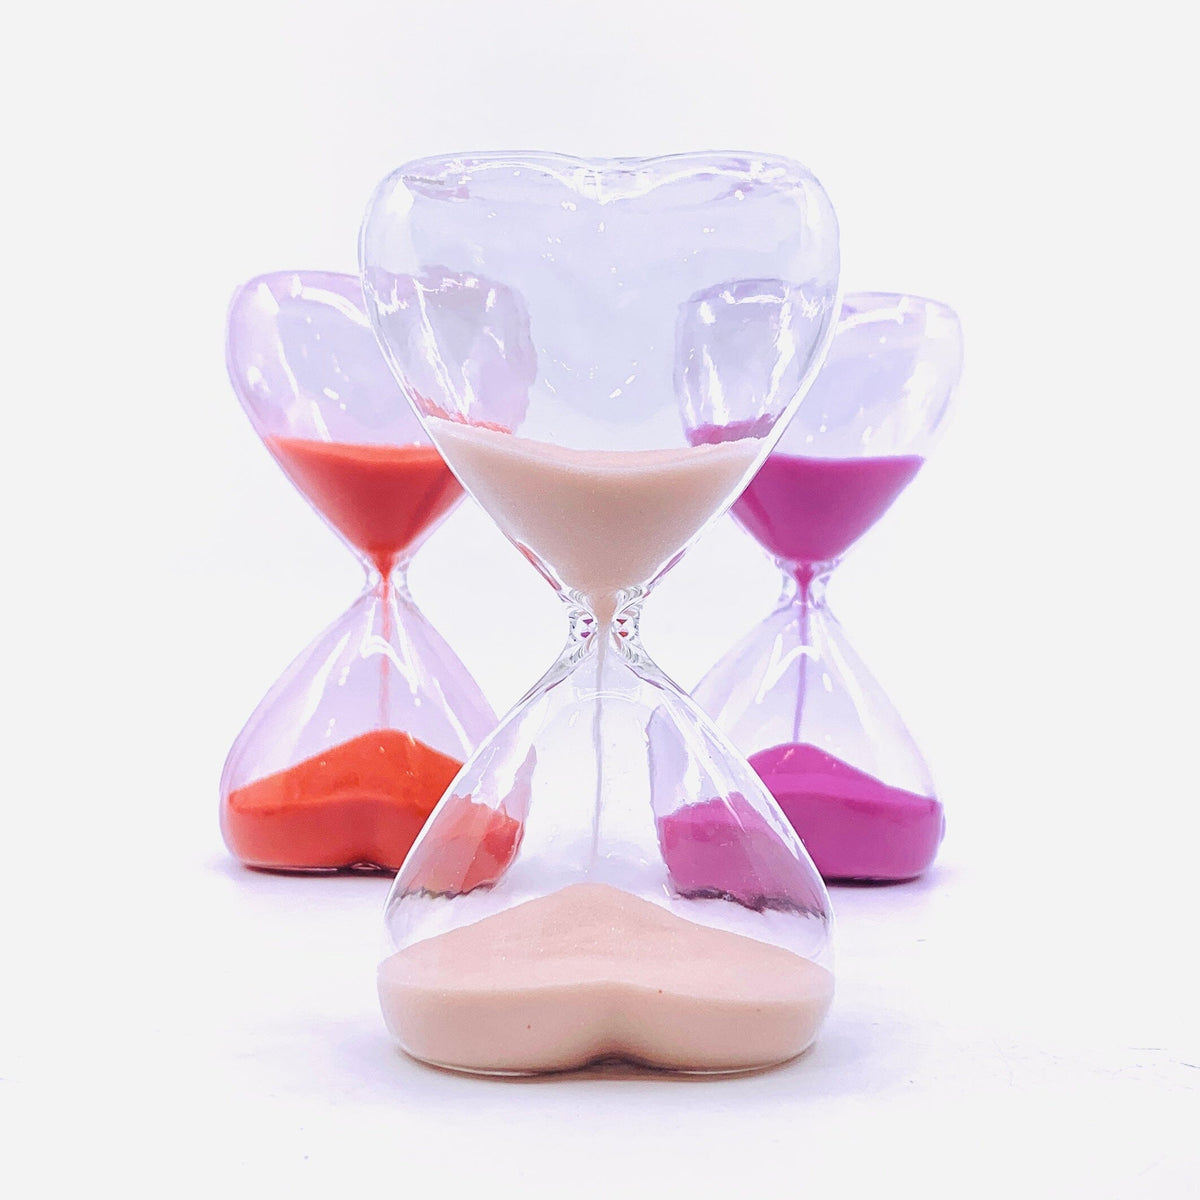 Time For Love - Valentines Heart Hour Glass, Hot Pink Decor One Hundred 80 Degrees 